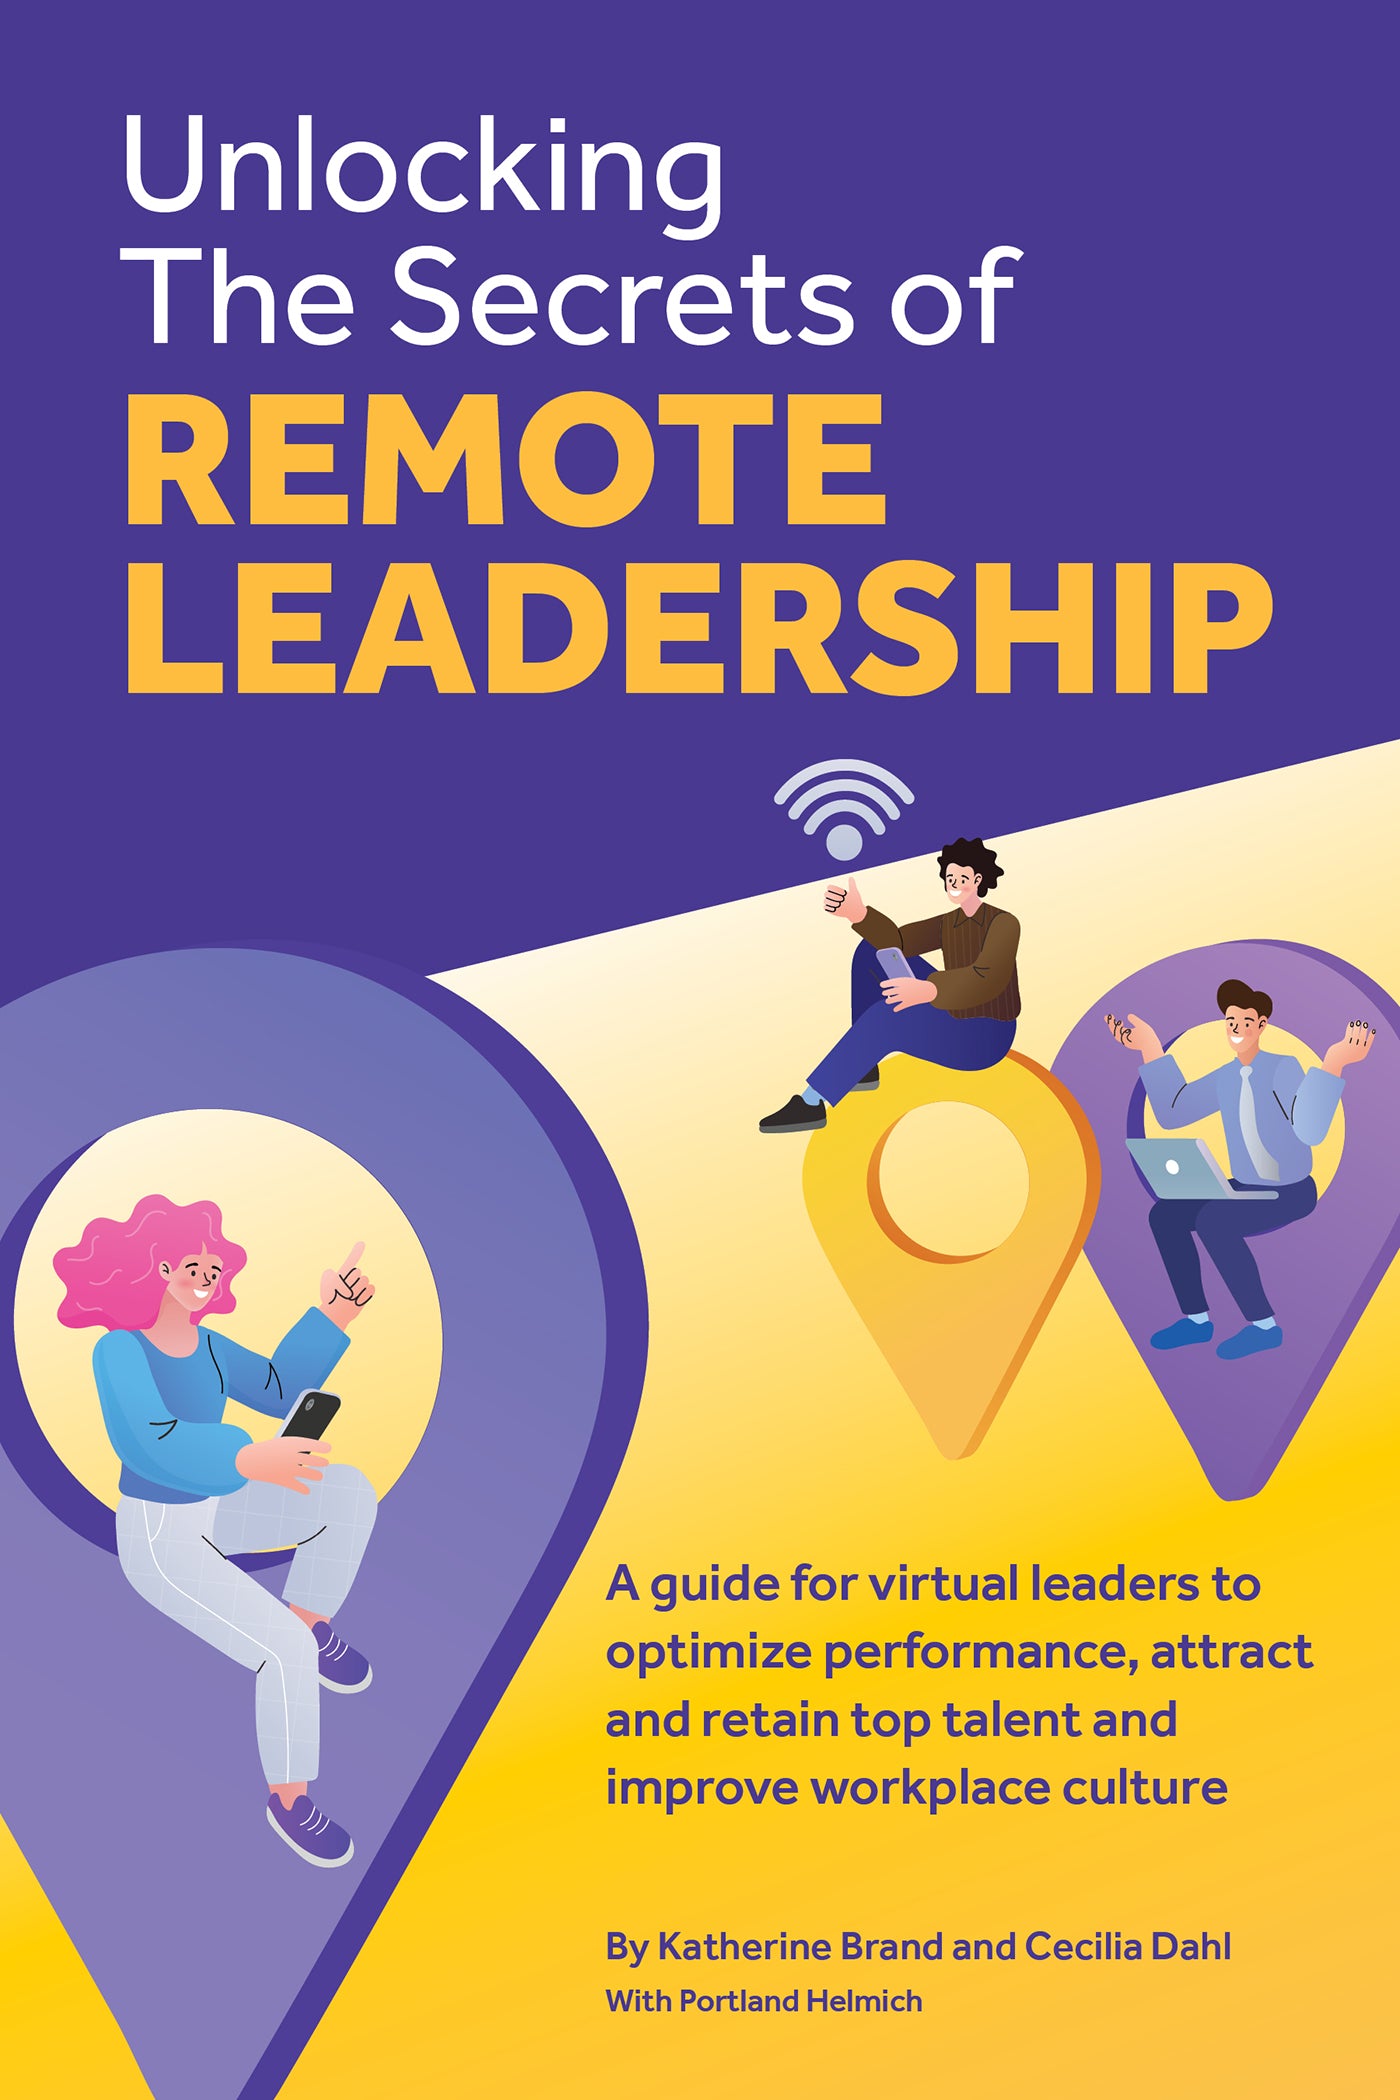 Unlocking the Secrets of Remote Leadership: A guide for virtual leaders to optimize performance, attract and retain top talent and improve workplace culture